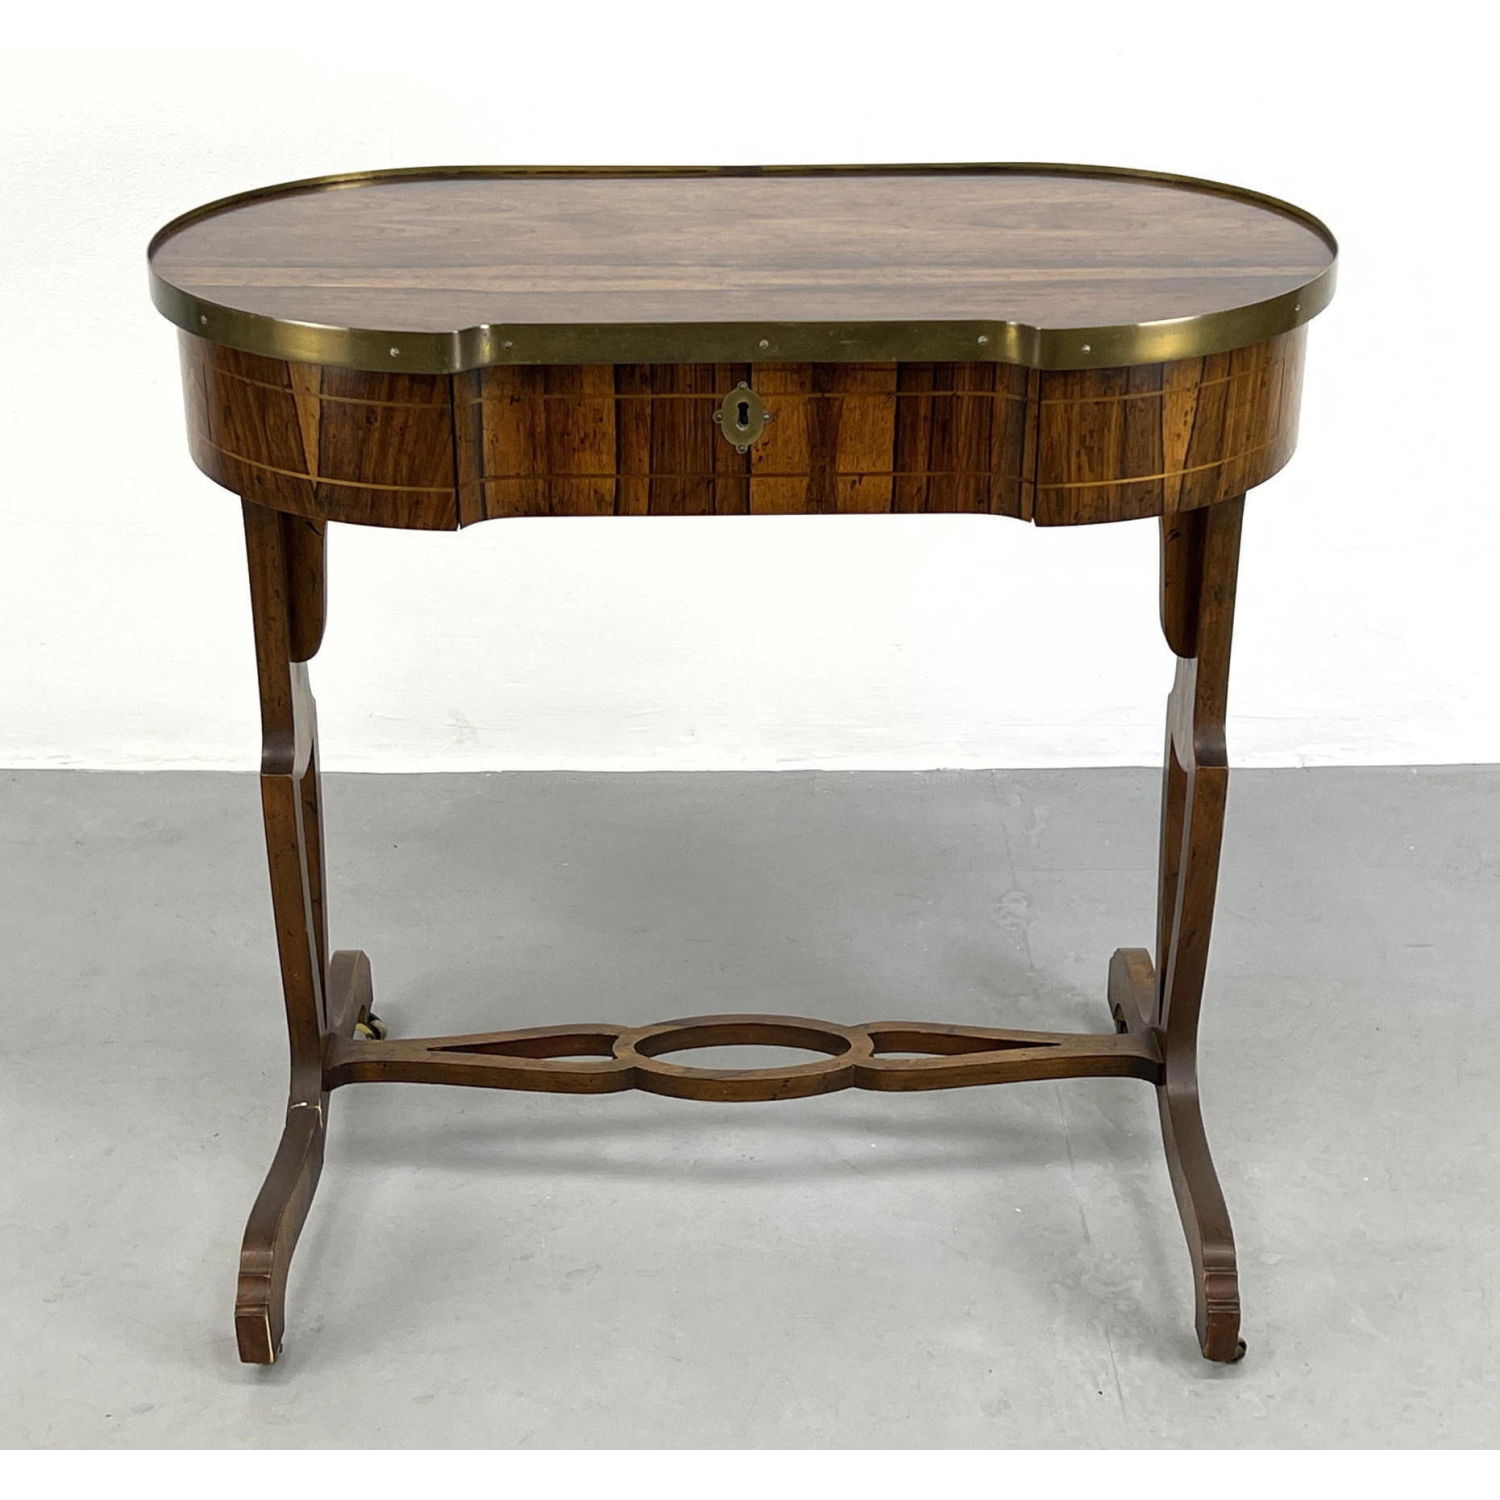 BAKER Rosewood Small Table. Single